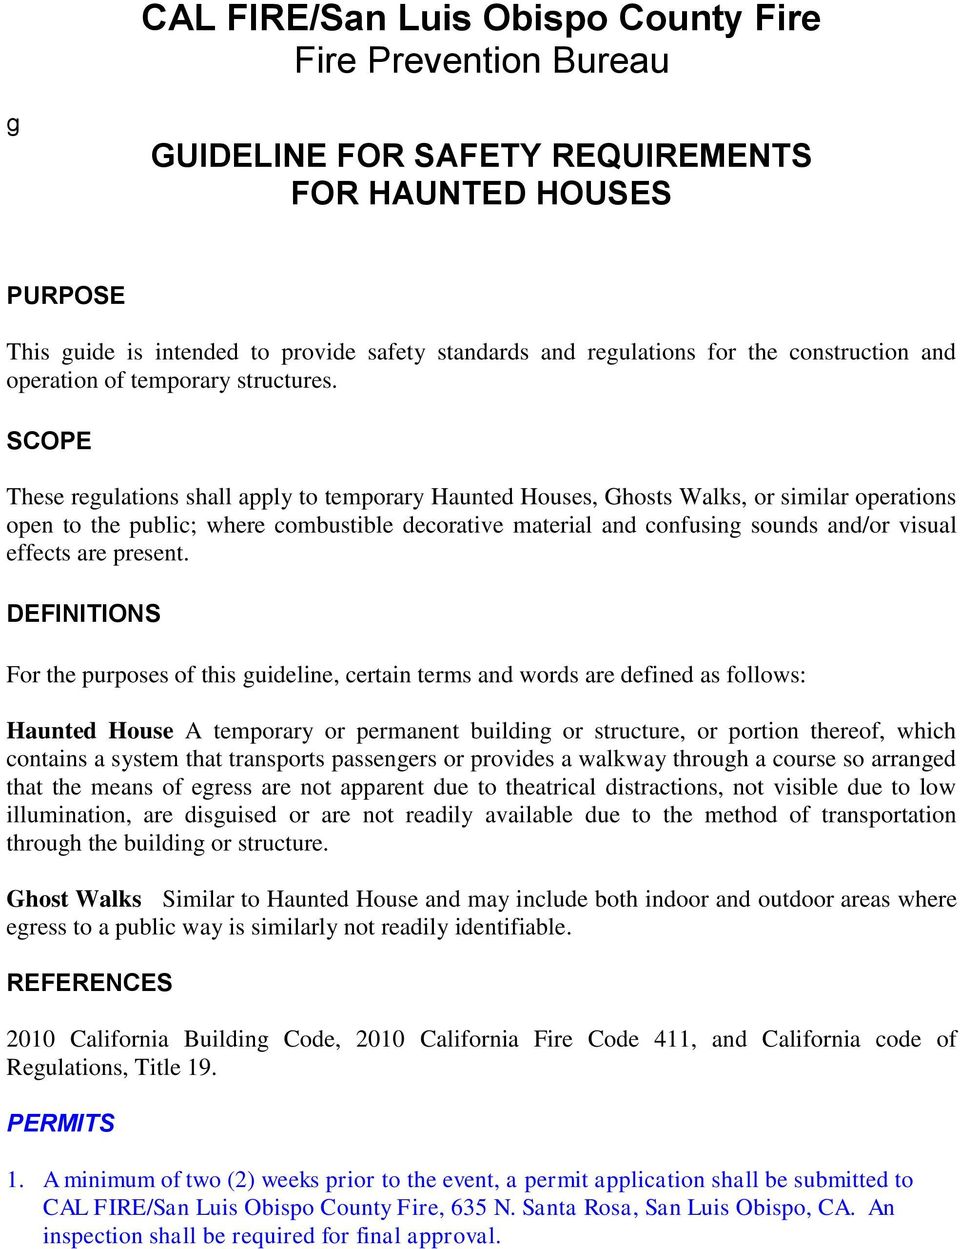 SCOPE These regulations shall apply to temporary Haunted Houses, Ghosts Walks, or similar operations open to the public; where combustible decorative material and confusing sounds and/or visual